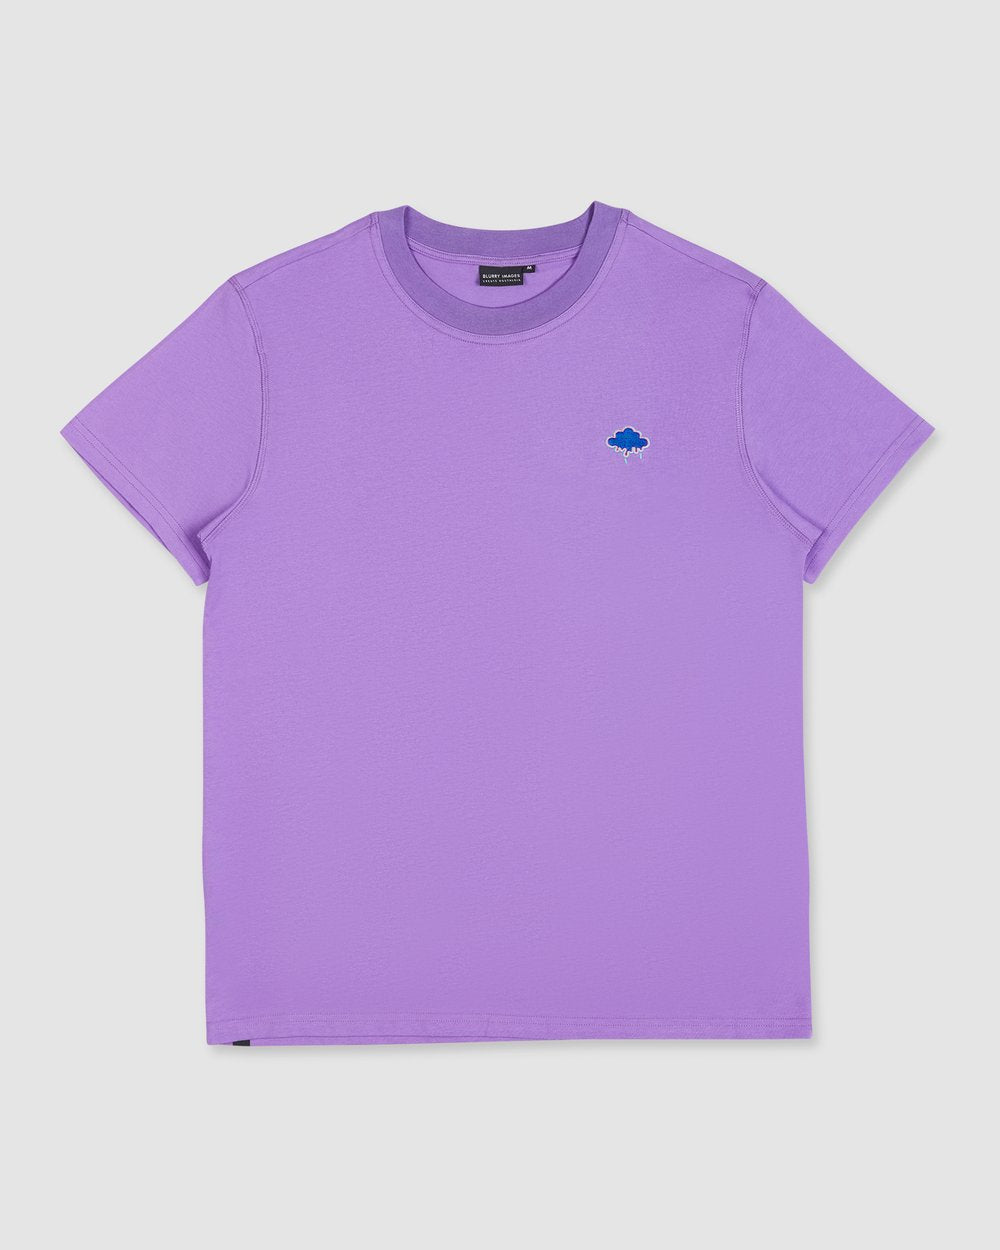 Blurry Images - Blurry Tee Purple